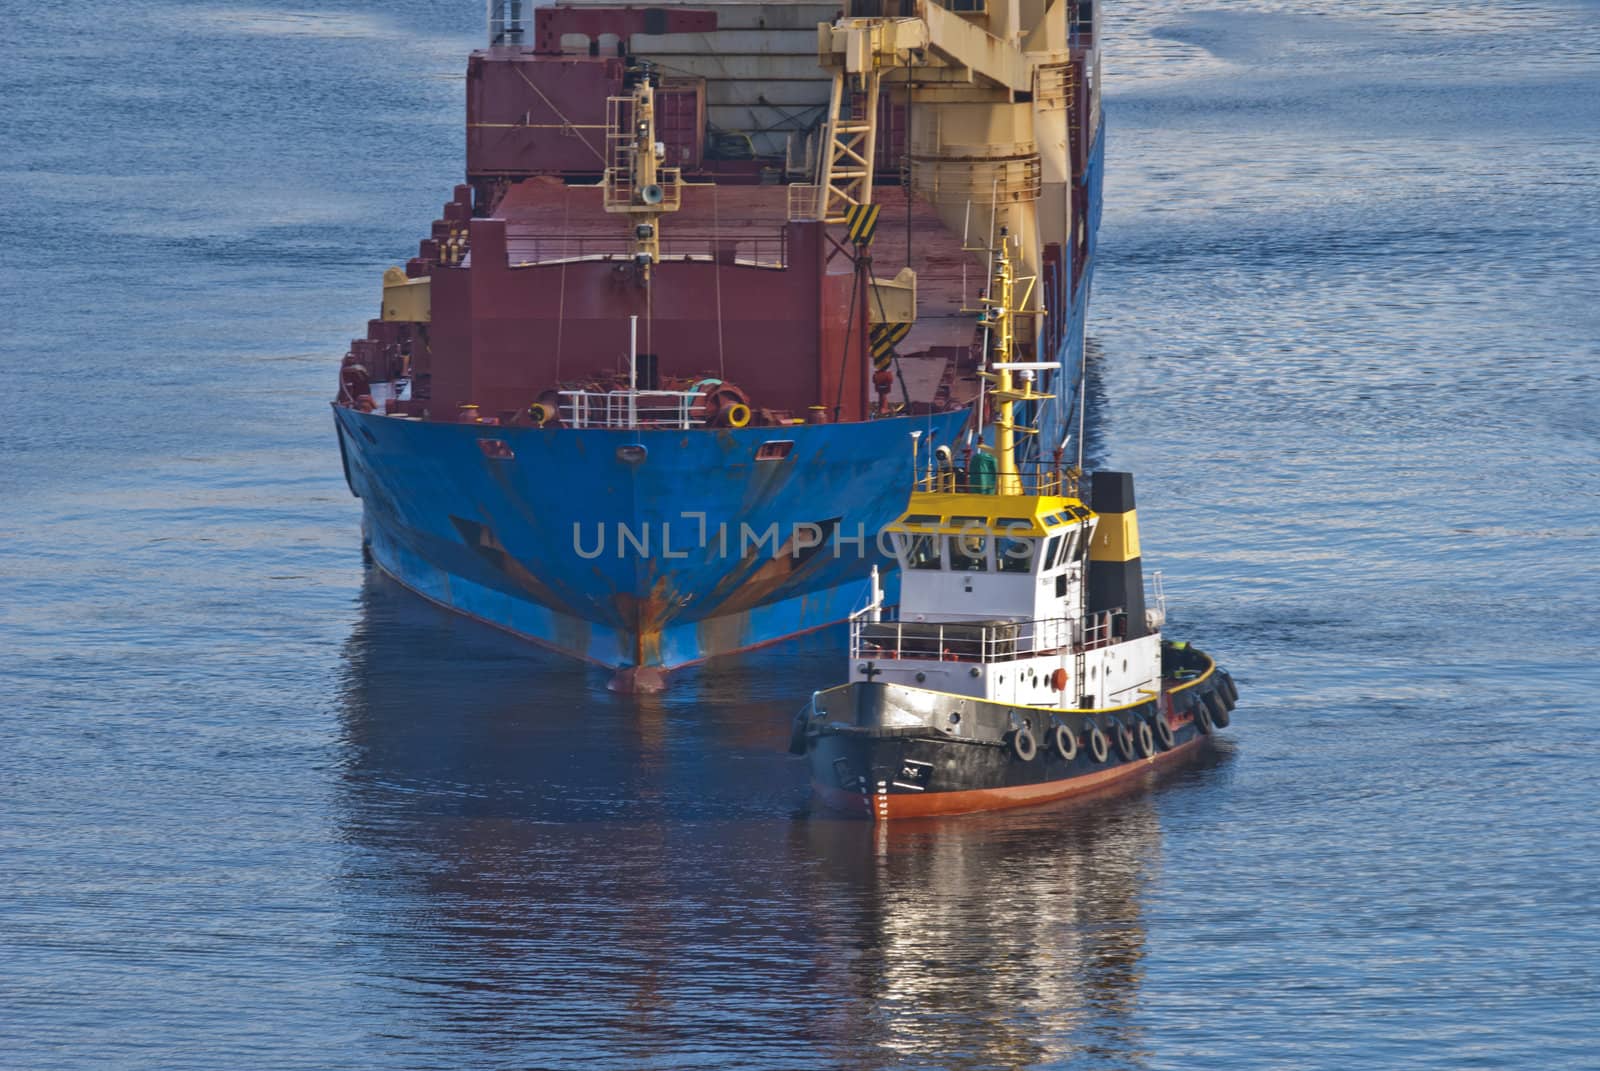 tug herbert meets bbc europe in the fjord, image 25 by steirus